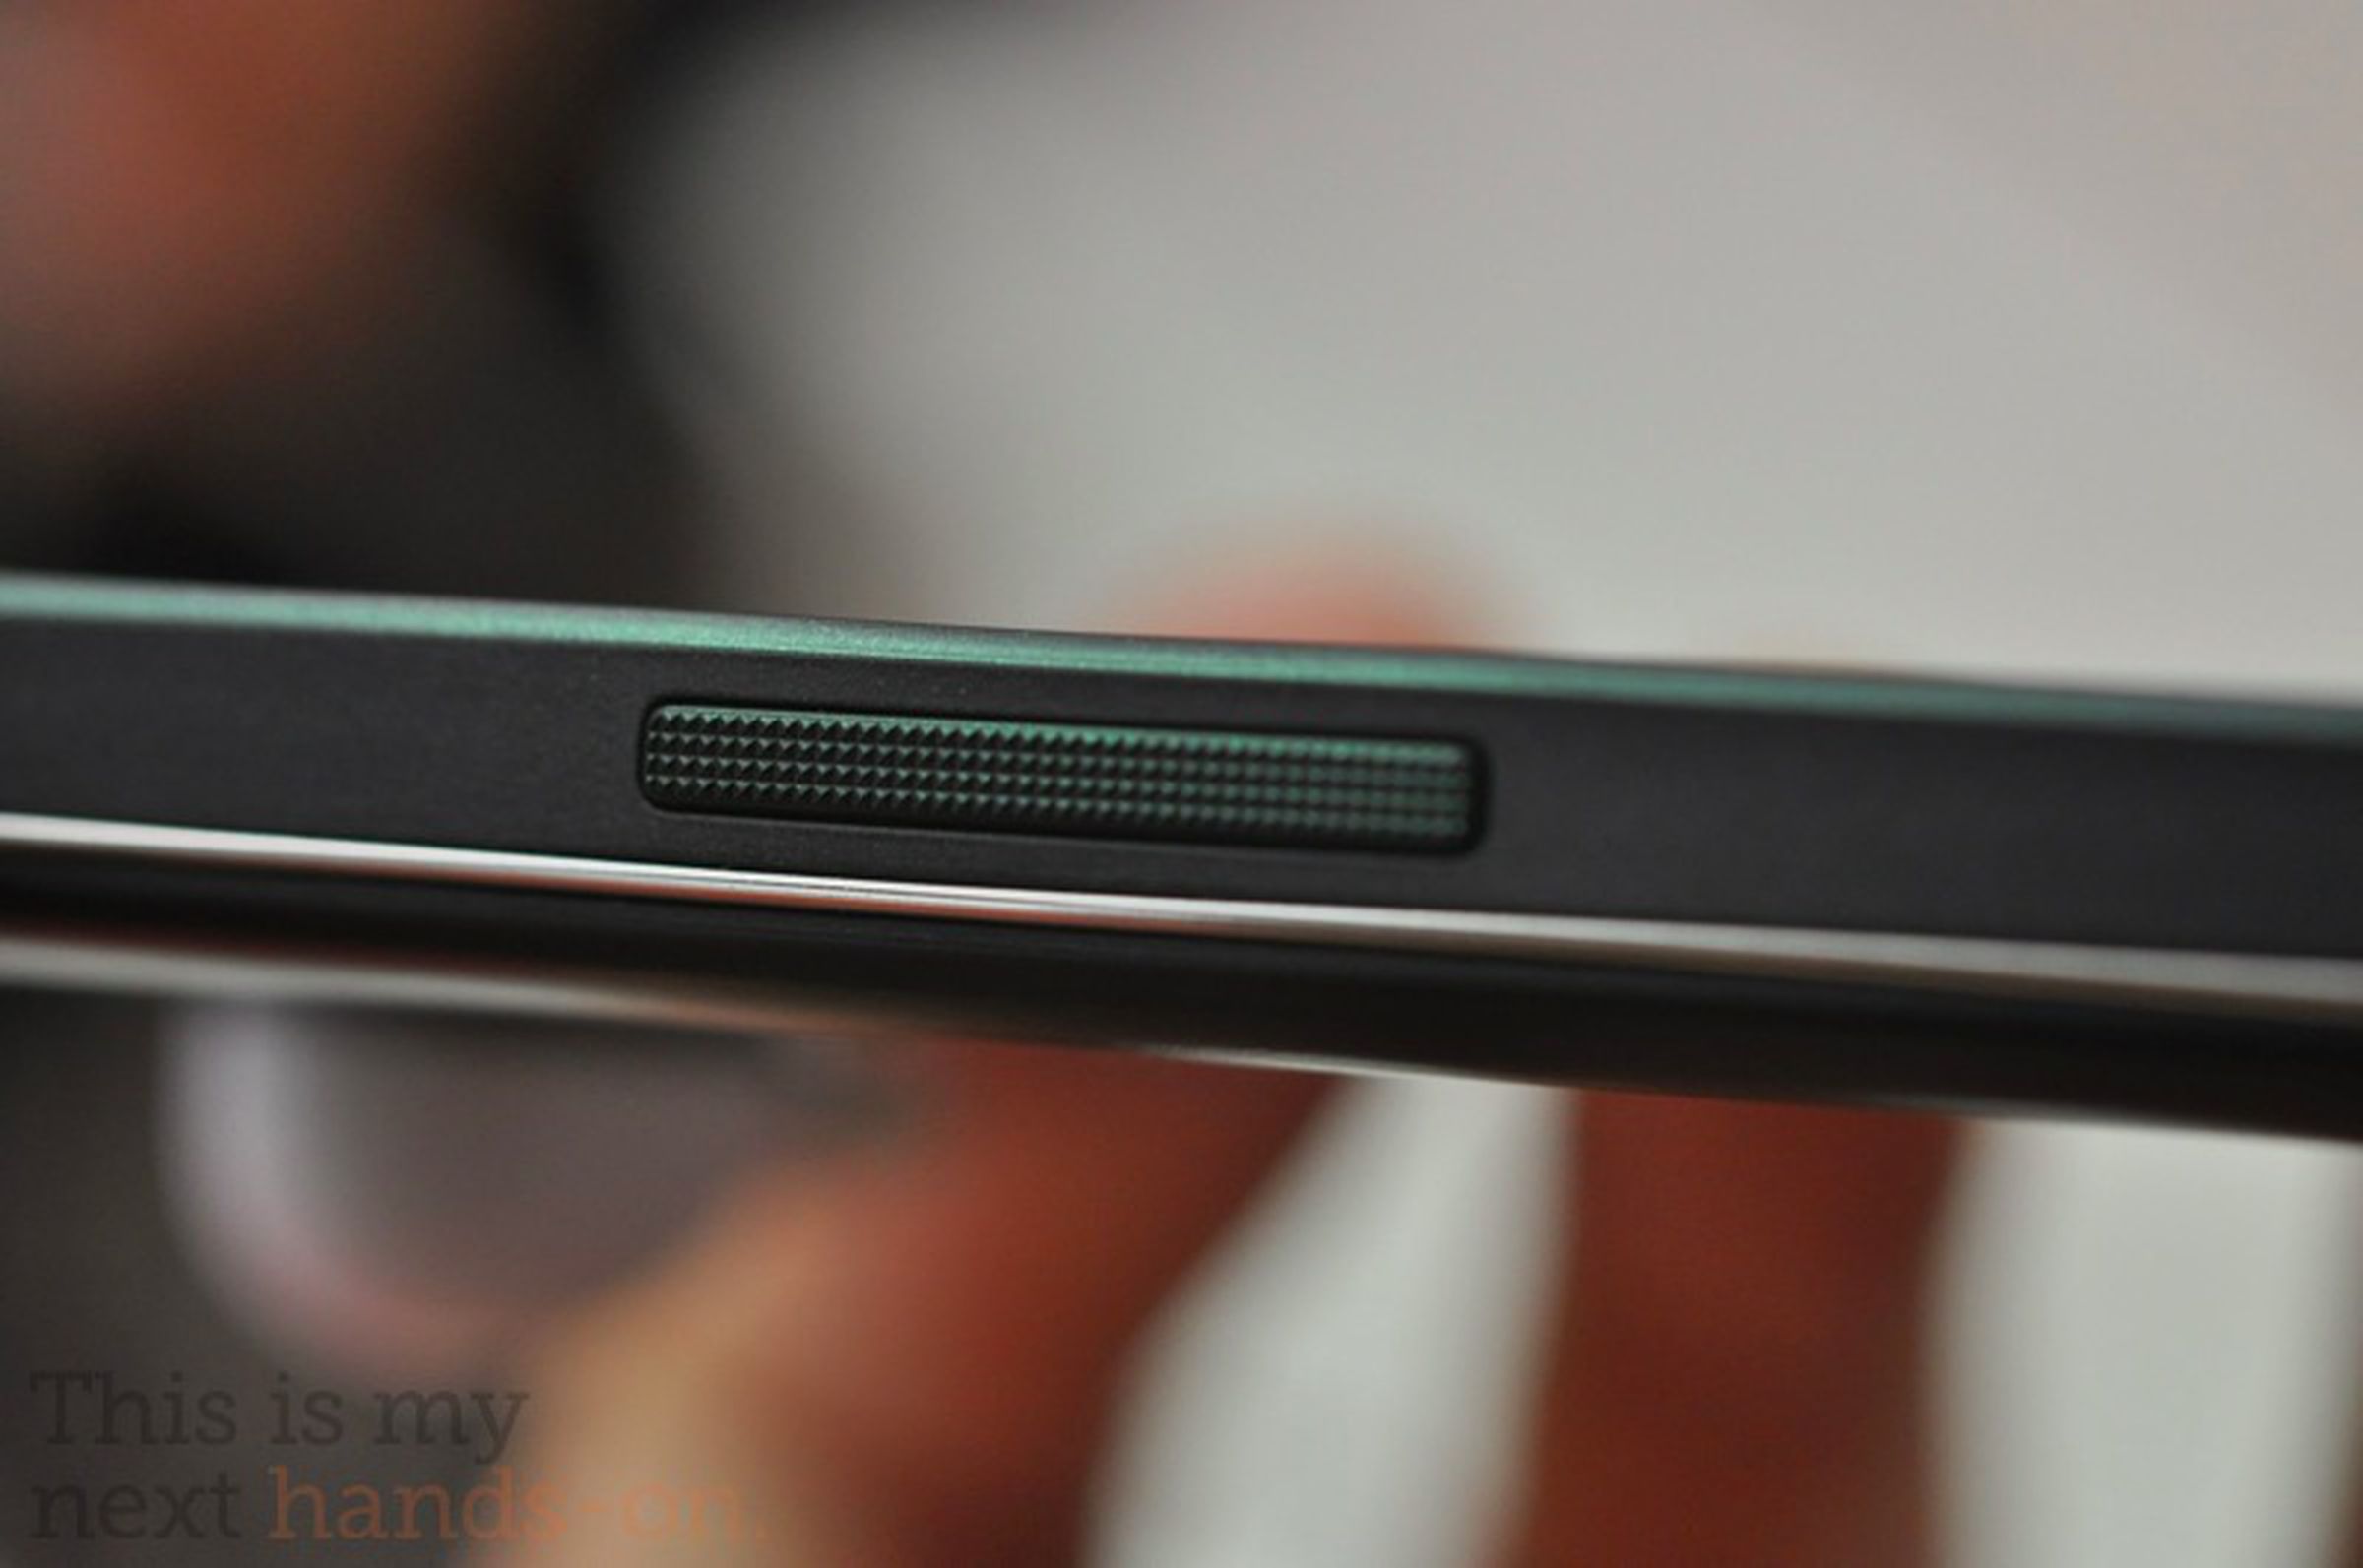 KT Spider Phone, Spider Laptop and Spider Pad: hands on photos